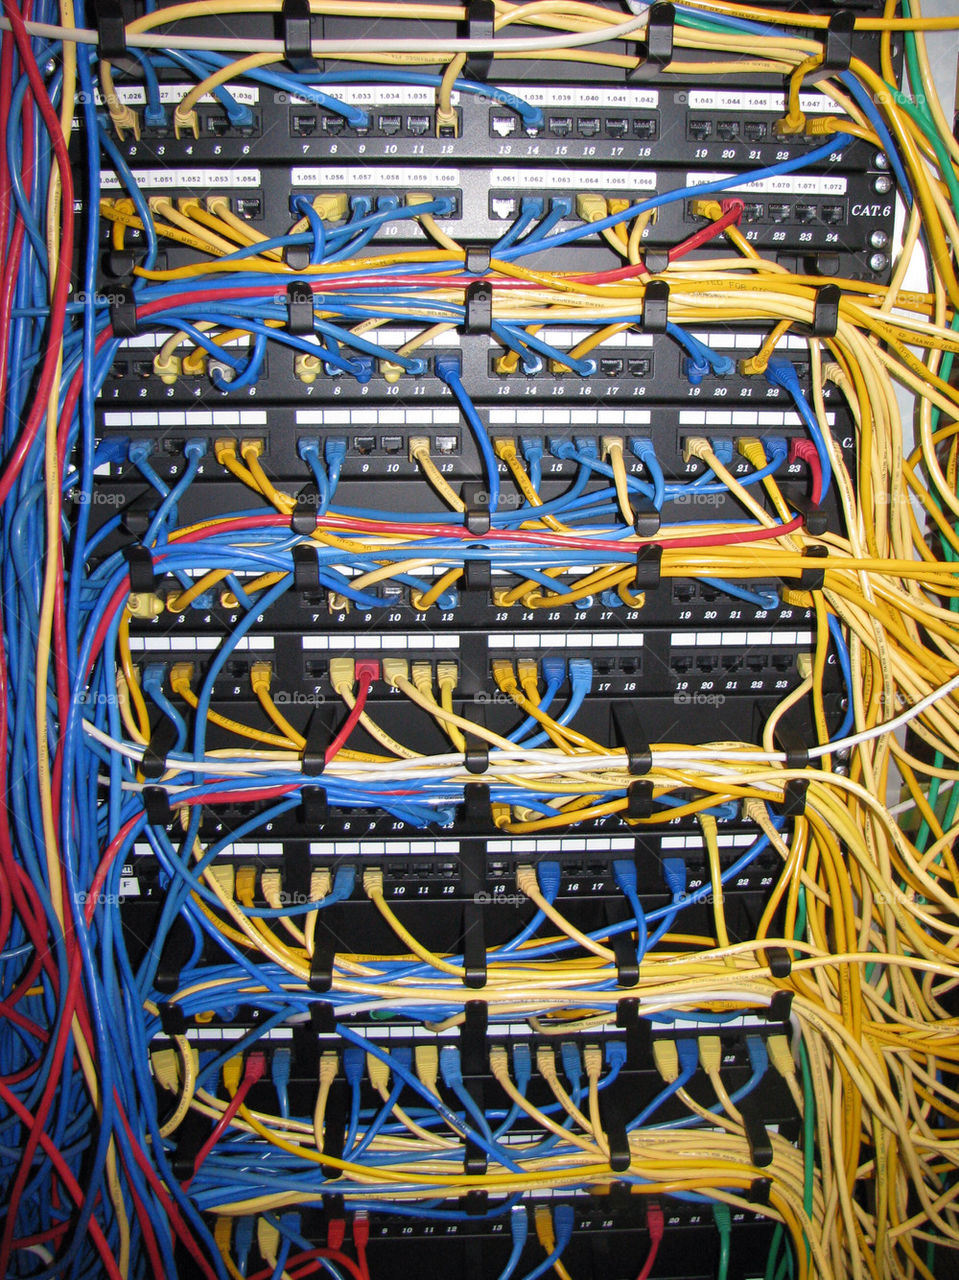 CABLE CHAOS